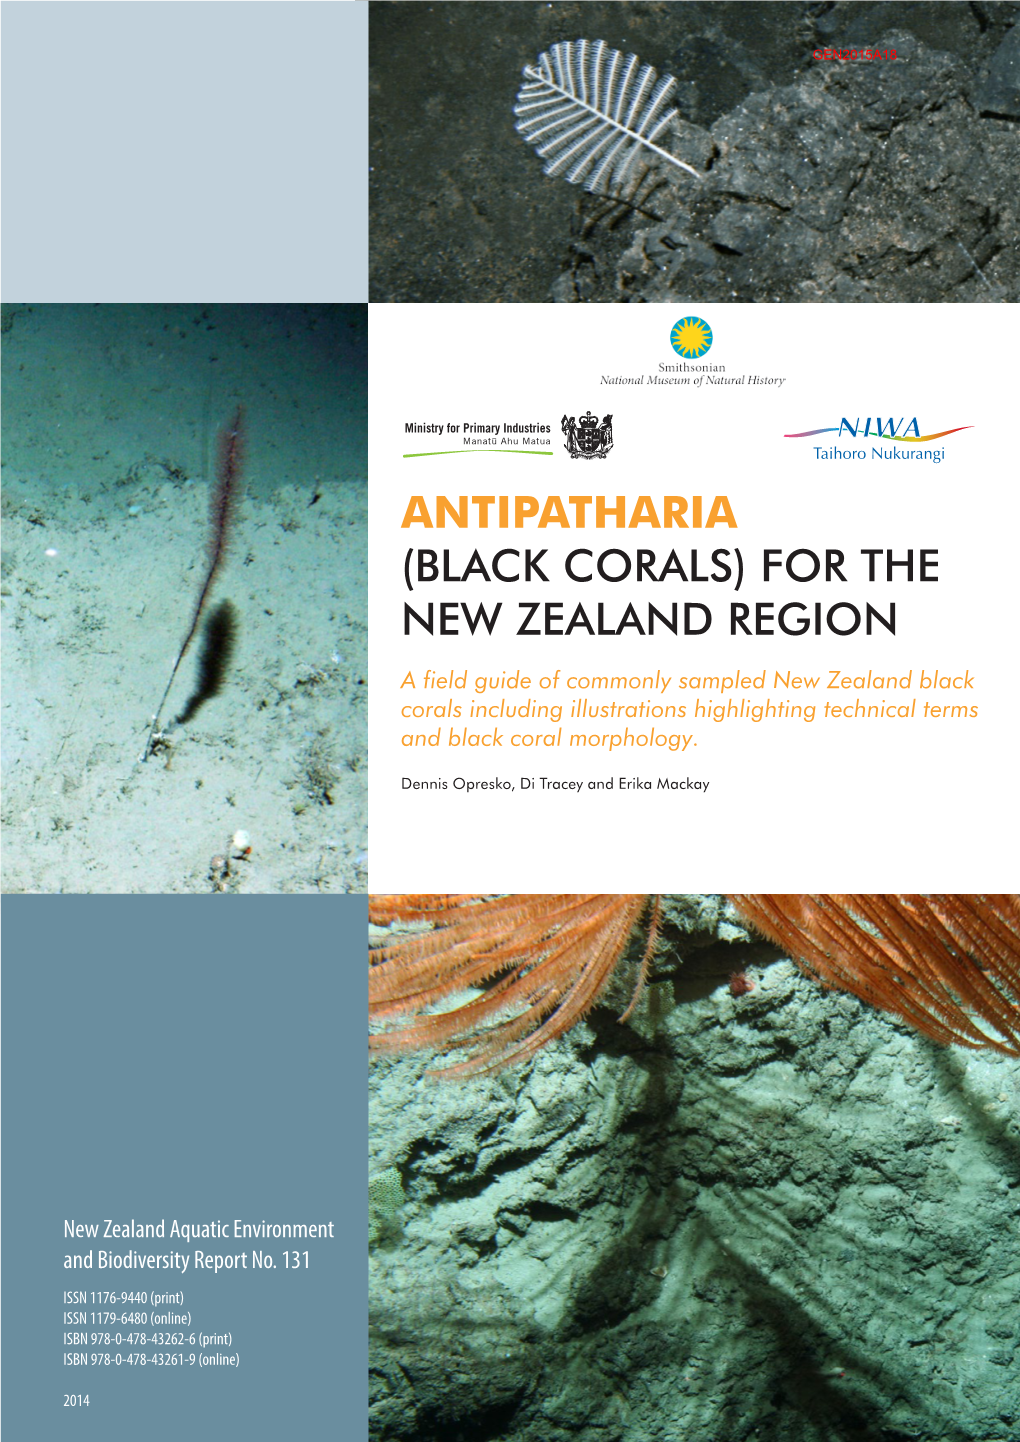 Black Corals) for the New Zealand Region